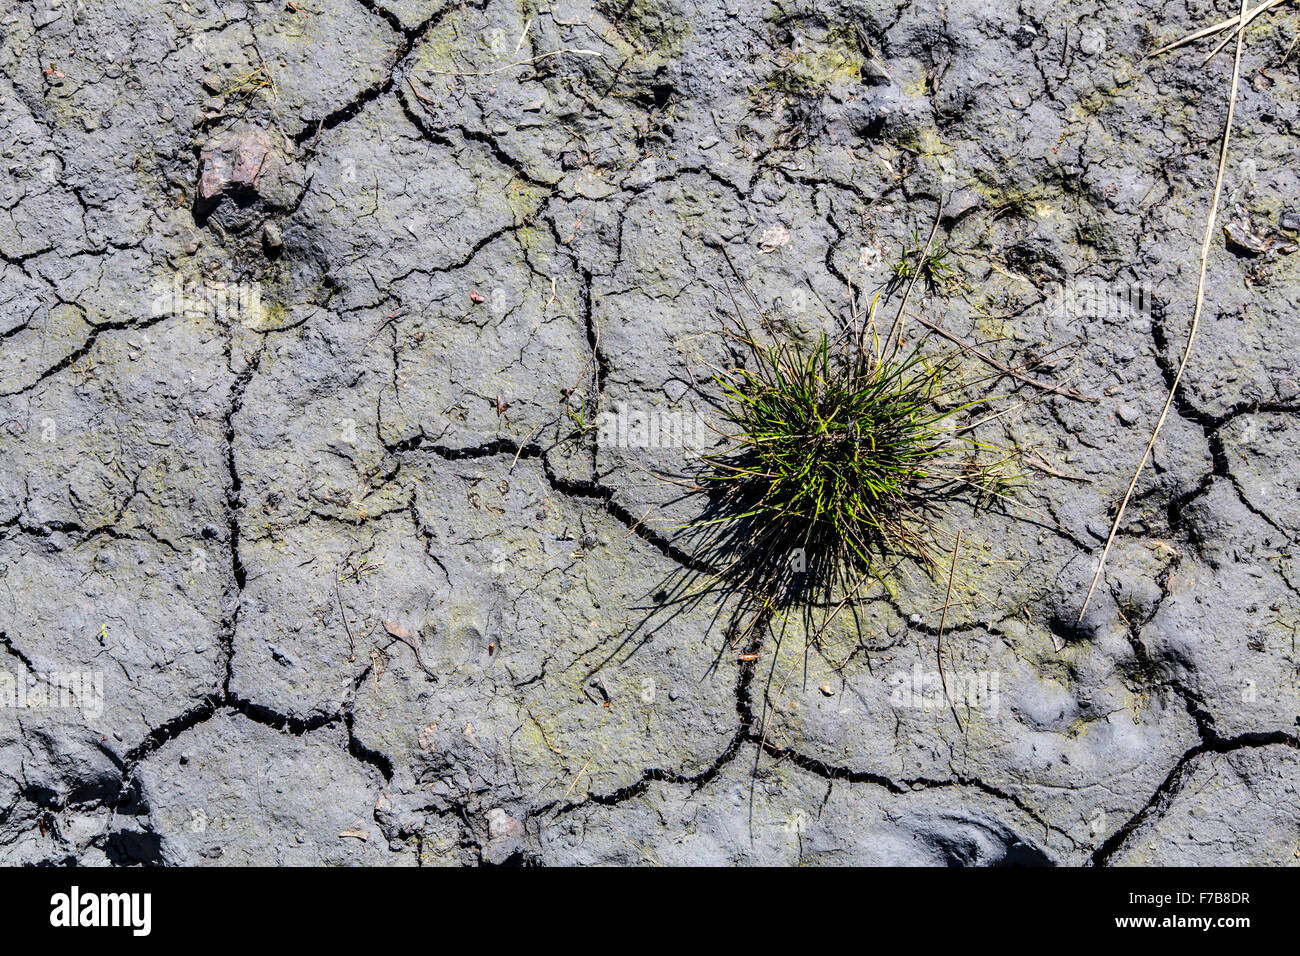 Dry soil with cracks, drought, dryness, green plant survives, Stock Photo